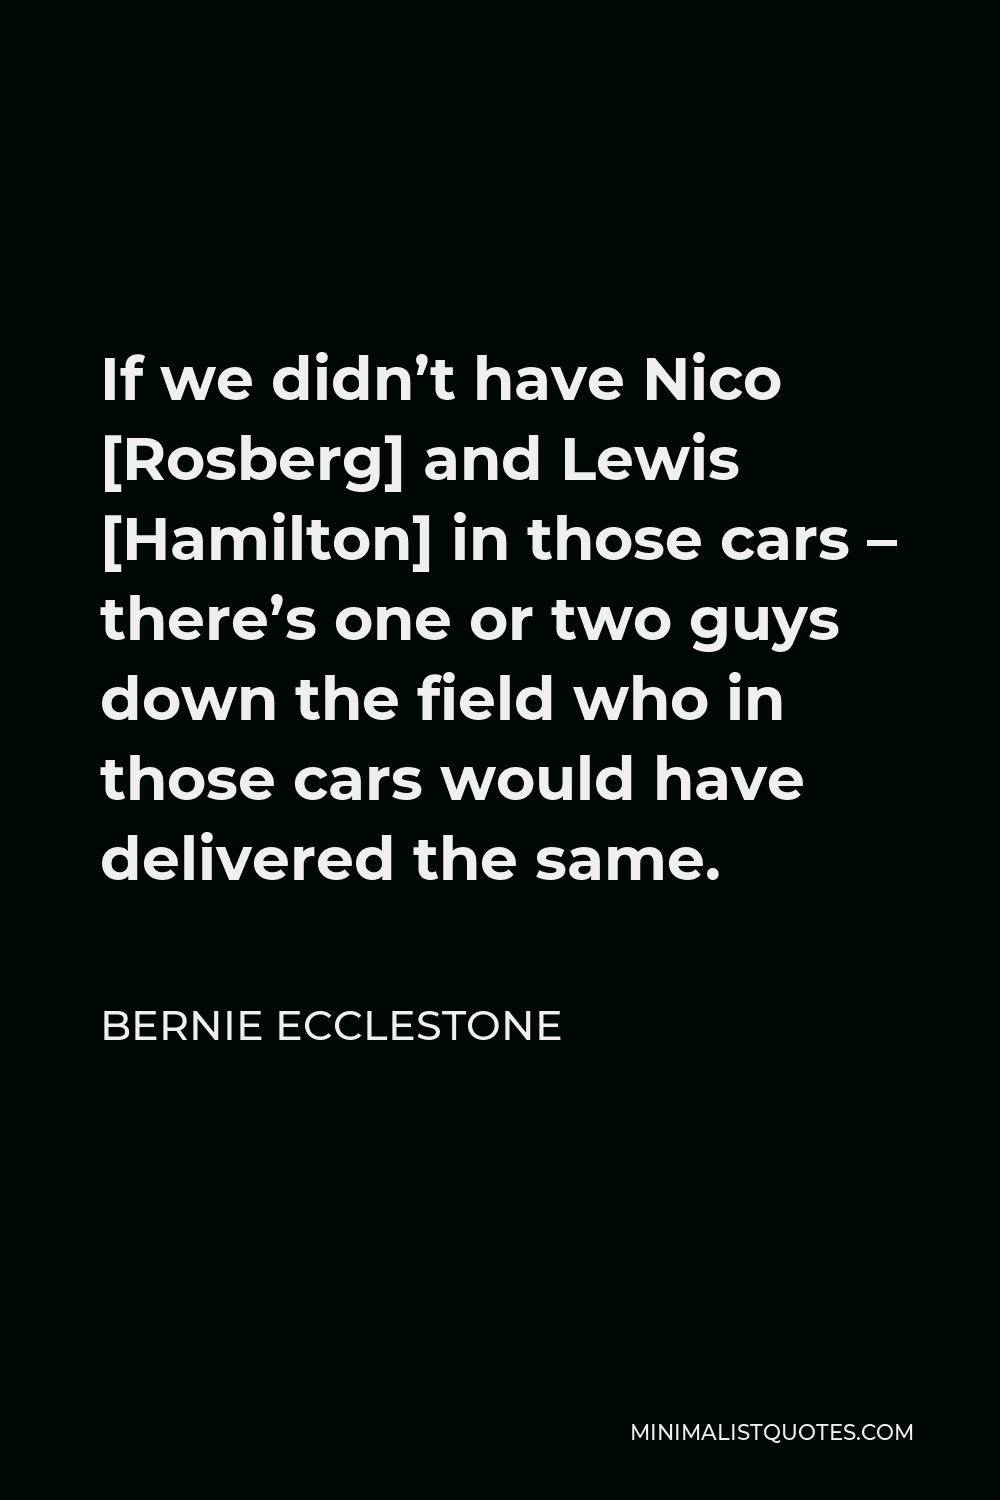 Bernie Ecclestone Quote - If we didn’t have Nico [Rosberg] and Lewis [Hamilton] in those cars – there’s one or two guys down the field who in those cars would have delivered the same.